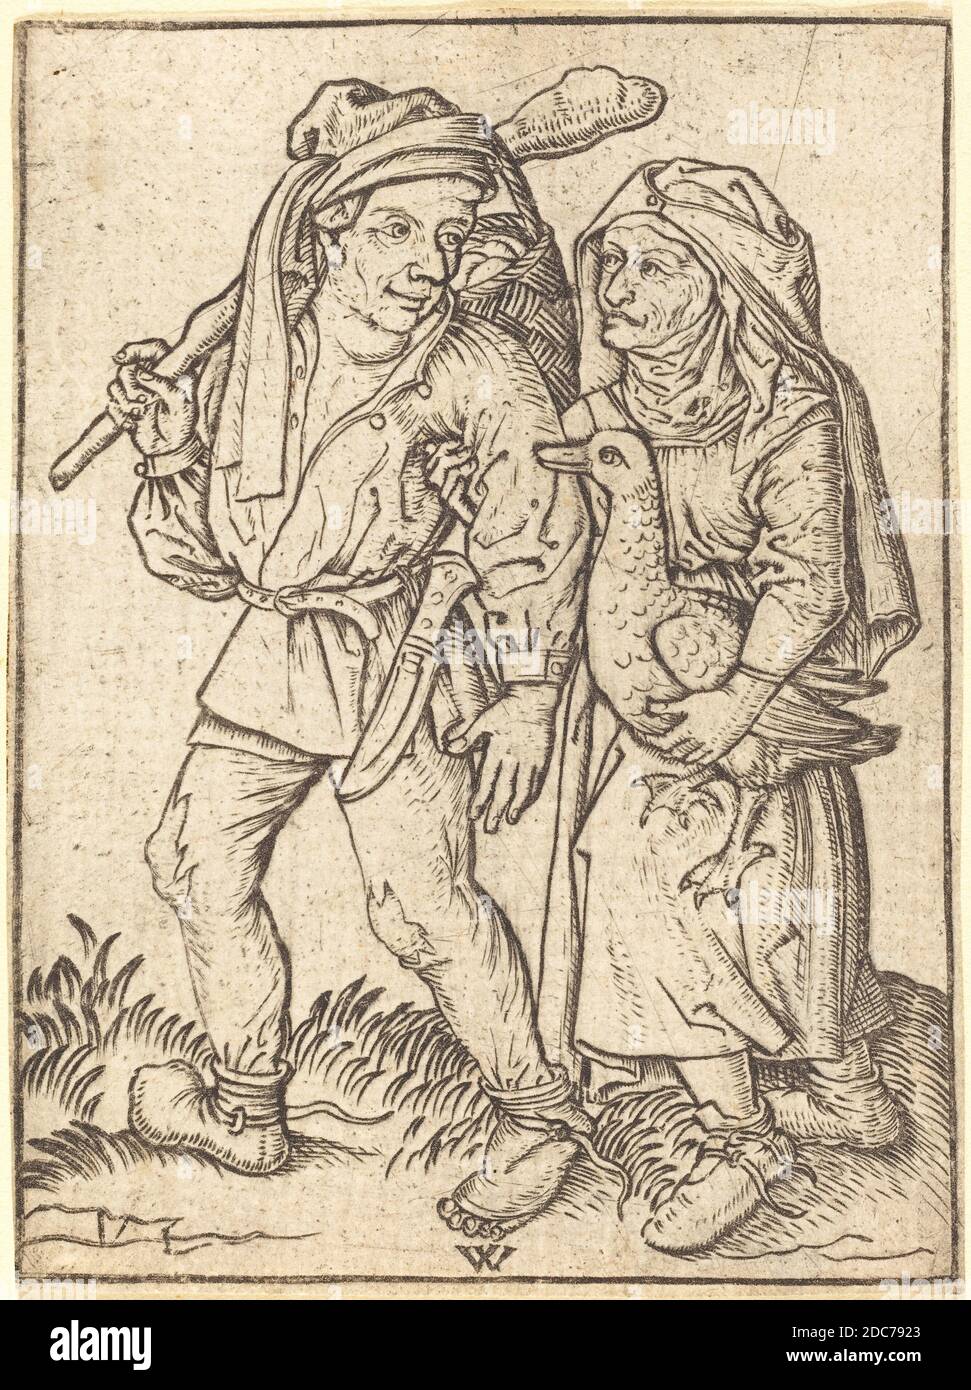 Wenzel von Olmutz, (artist), German, active 1481/1497, Master of the Housebook, (artist after), German, active c. 1470 - 1500, Farmer and Wife with Goose, c. 1490, engraving Stock Photo